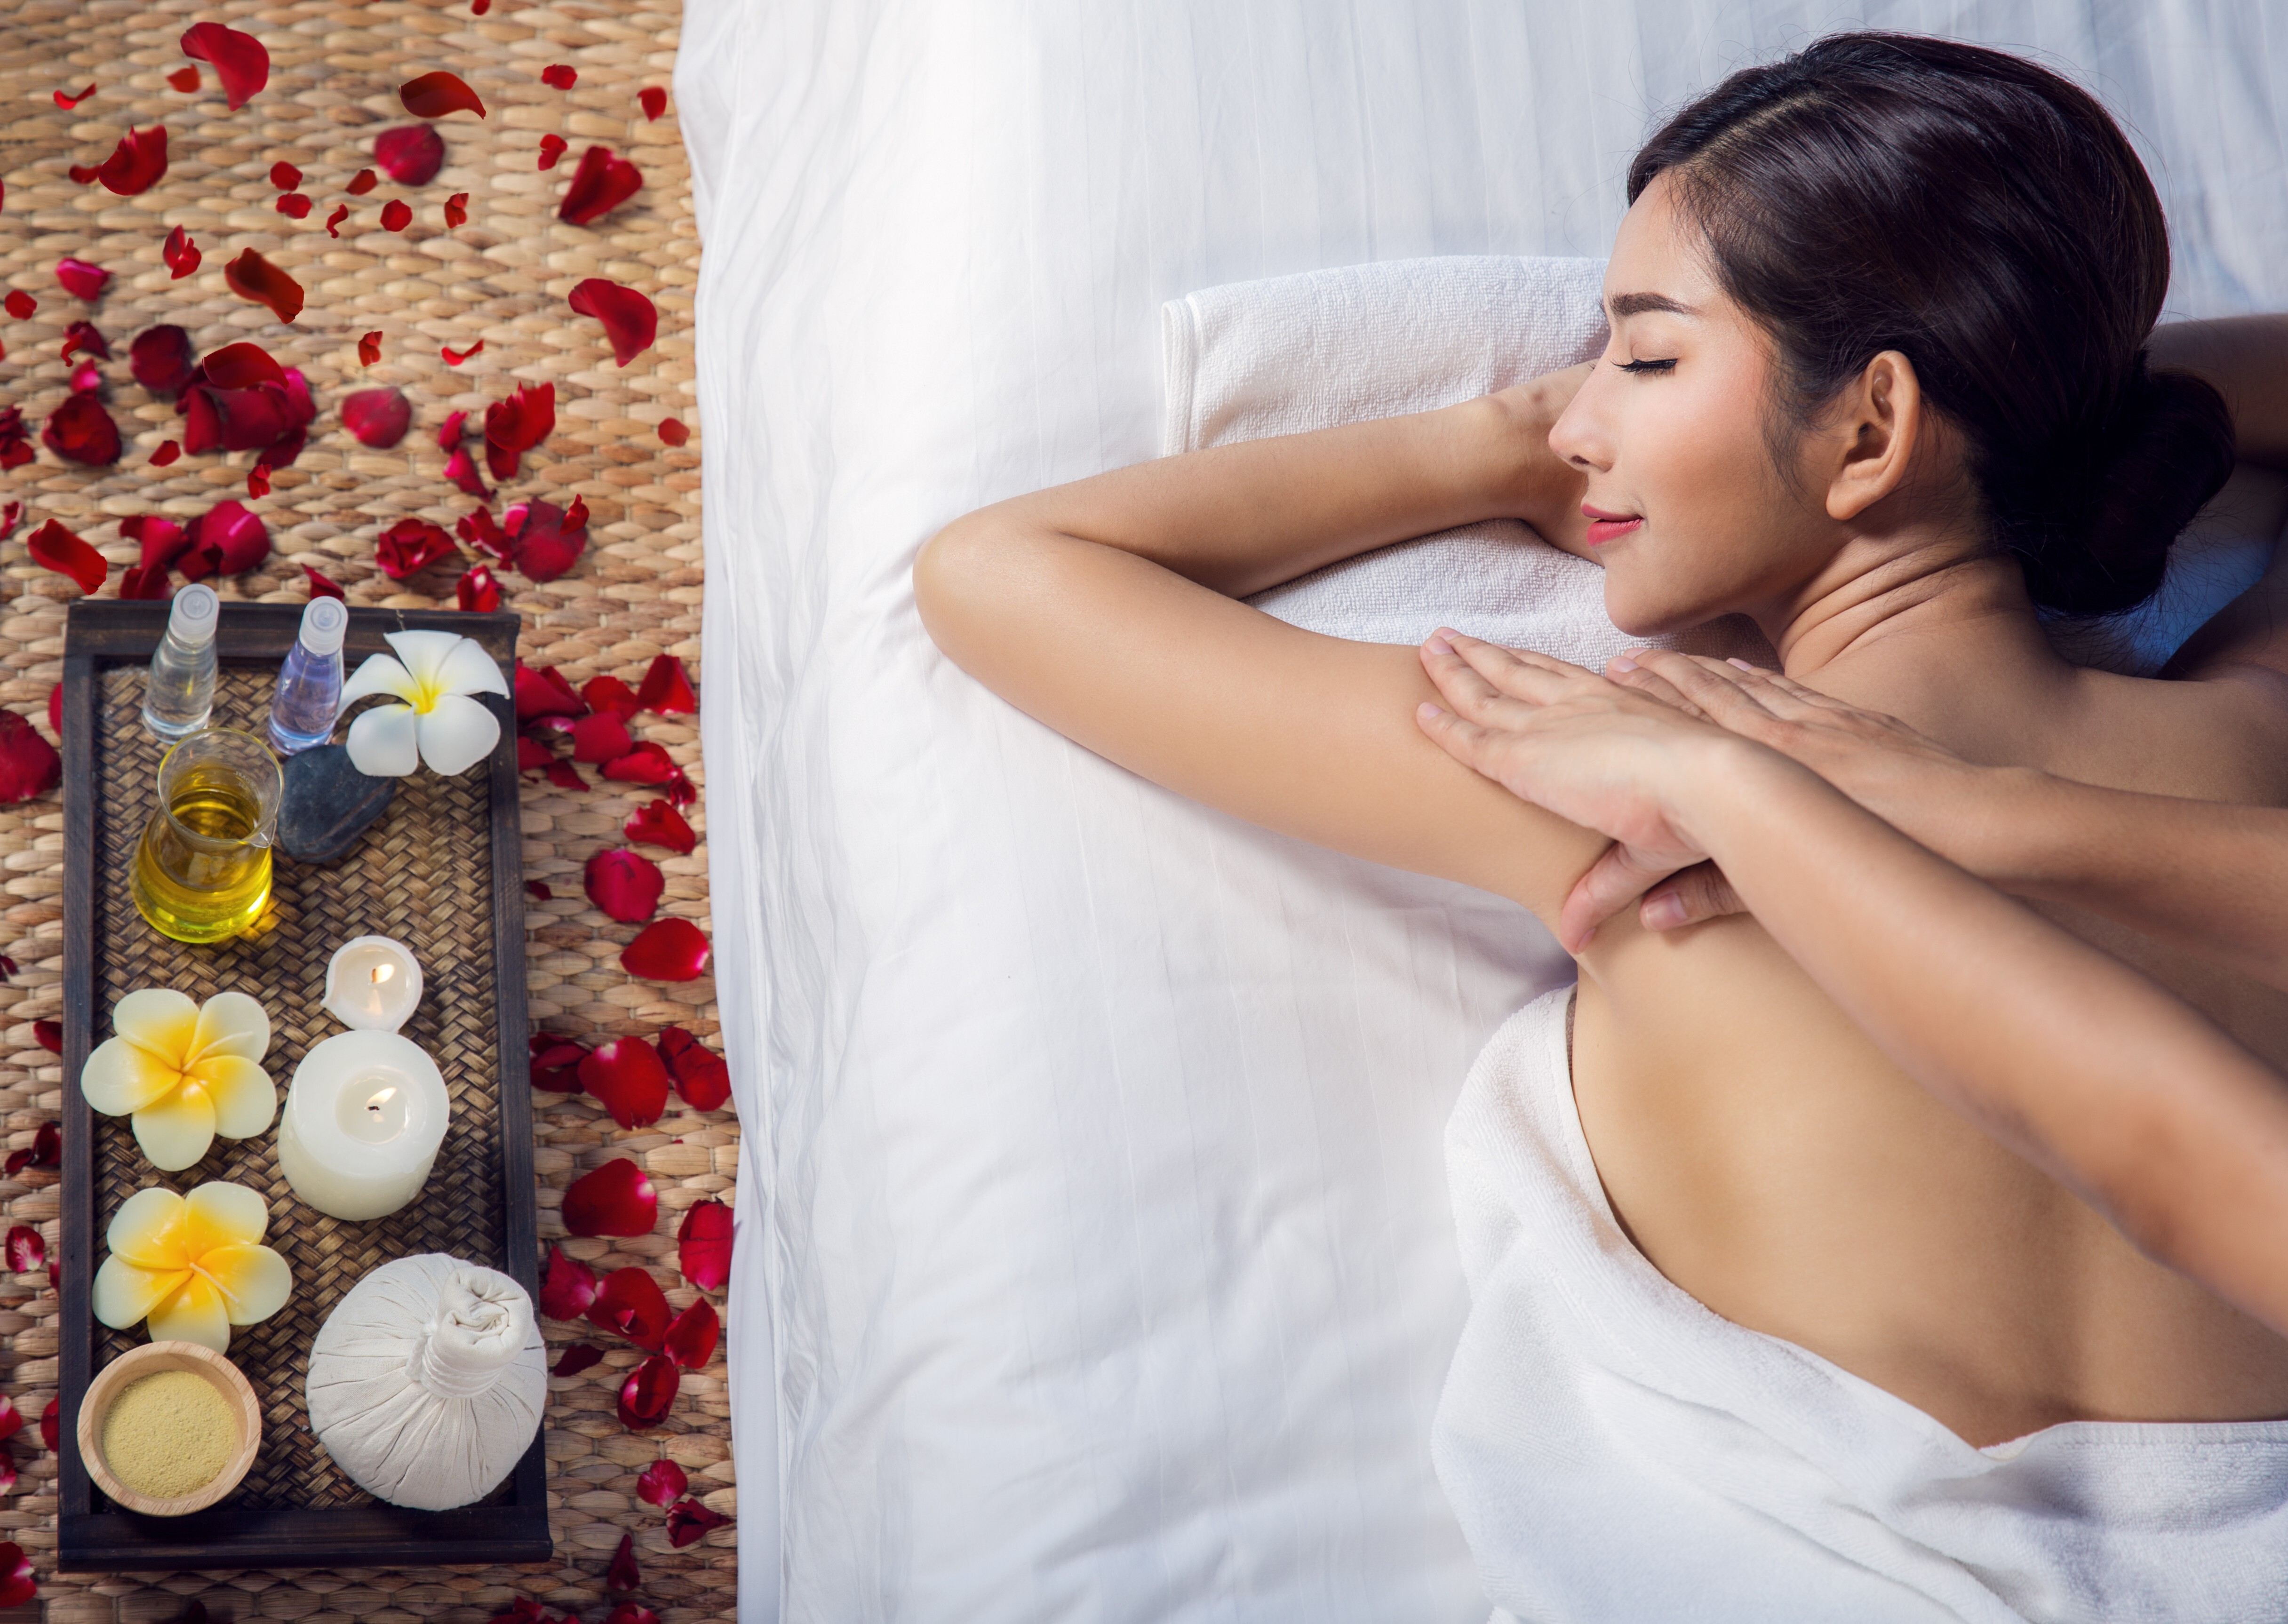 De-stressing shouldn’t be stressful. With spas and beauty salons reopening in Hong Kong, new hygiene measures are being widely implemented to put guests’ minds at ease. Photo: Shutterstock